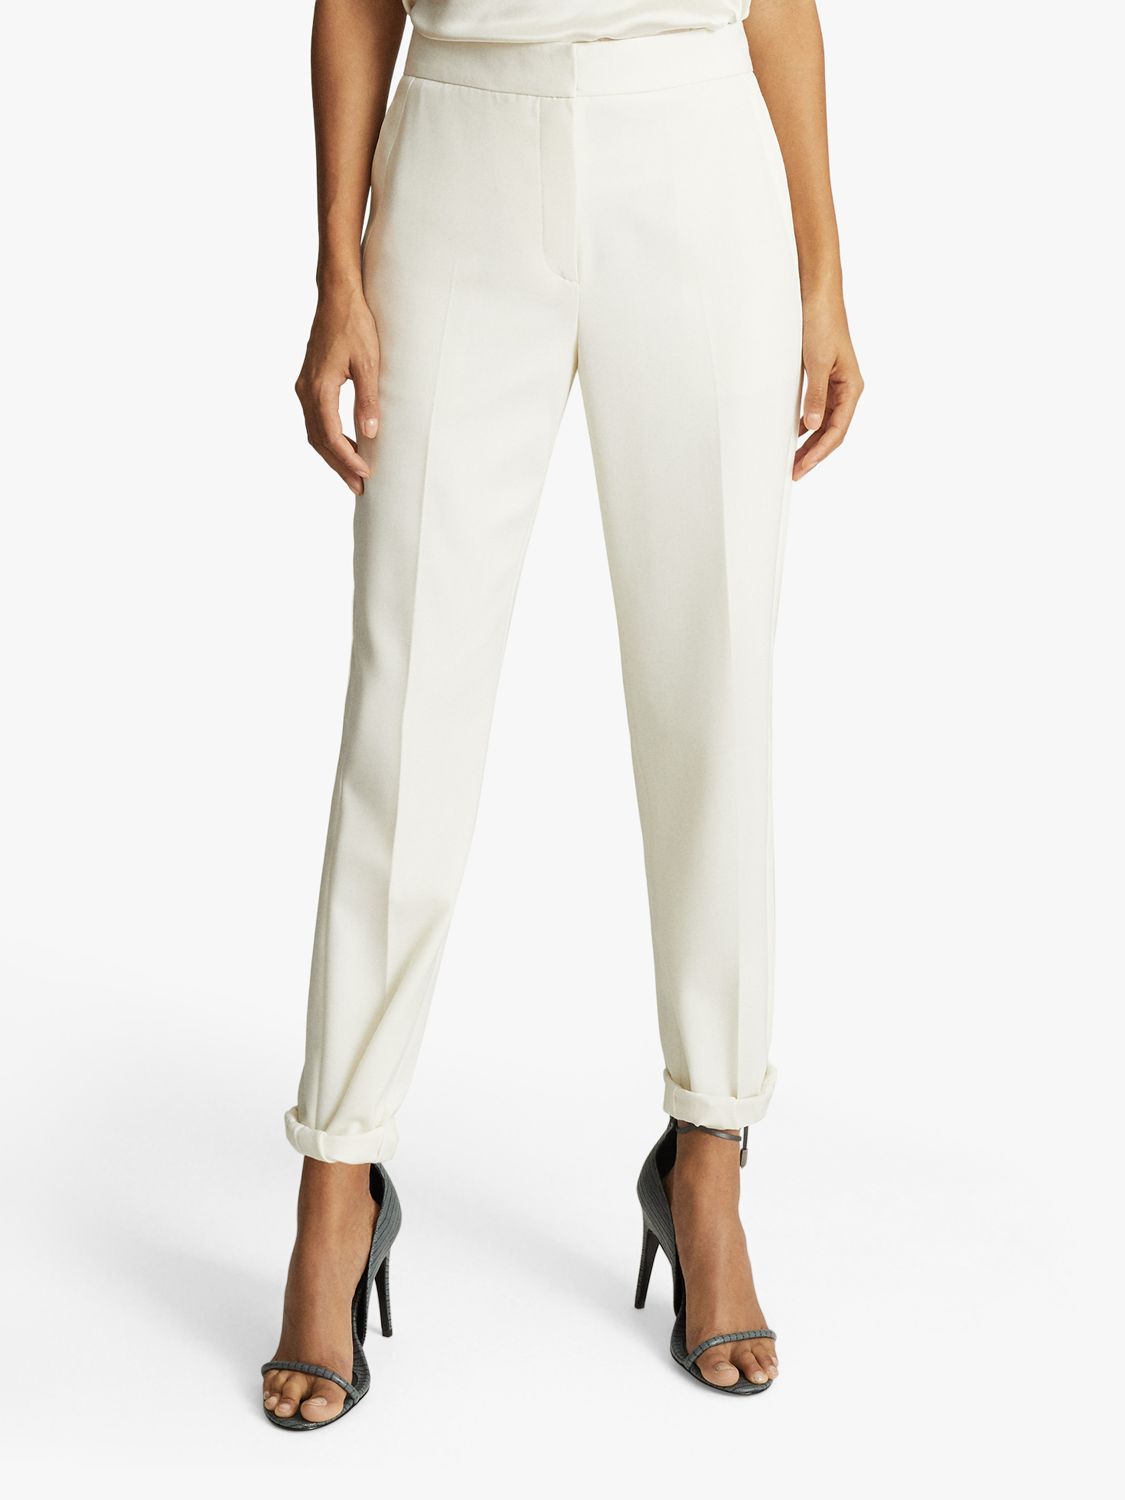 Reiss Leah Trousers, White at John Lewis & Partners